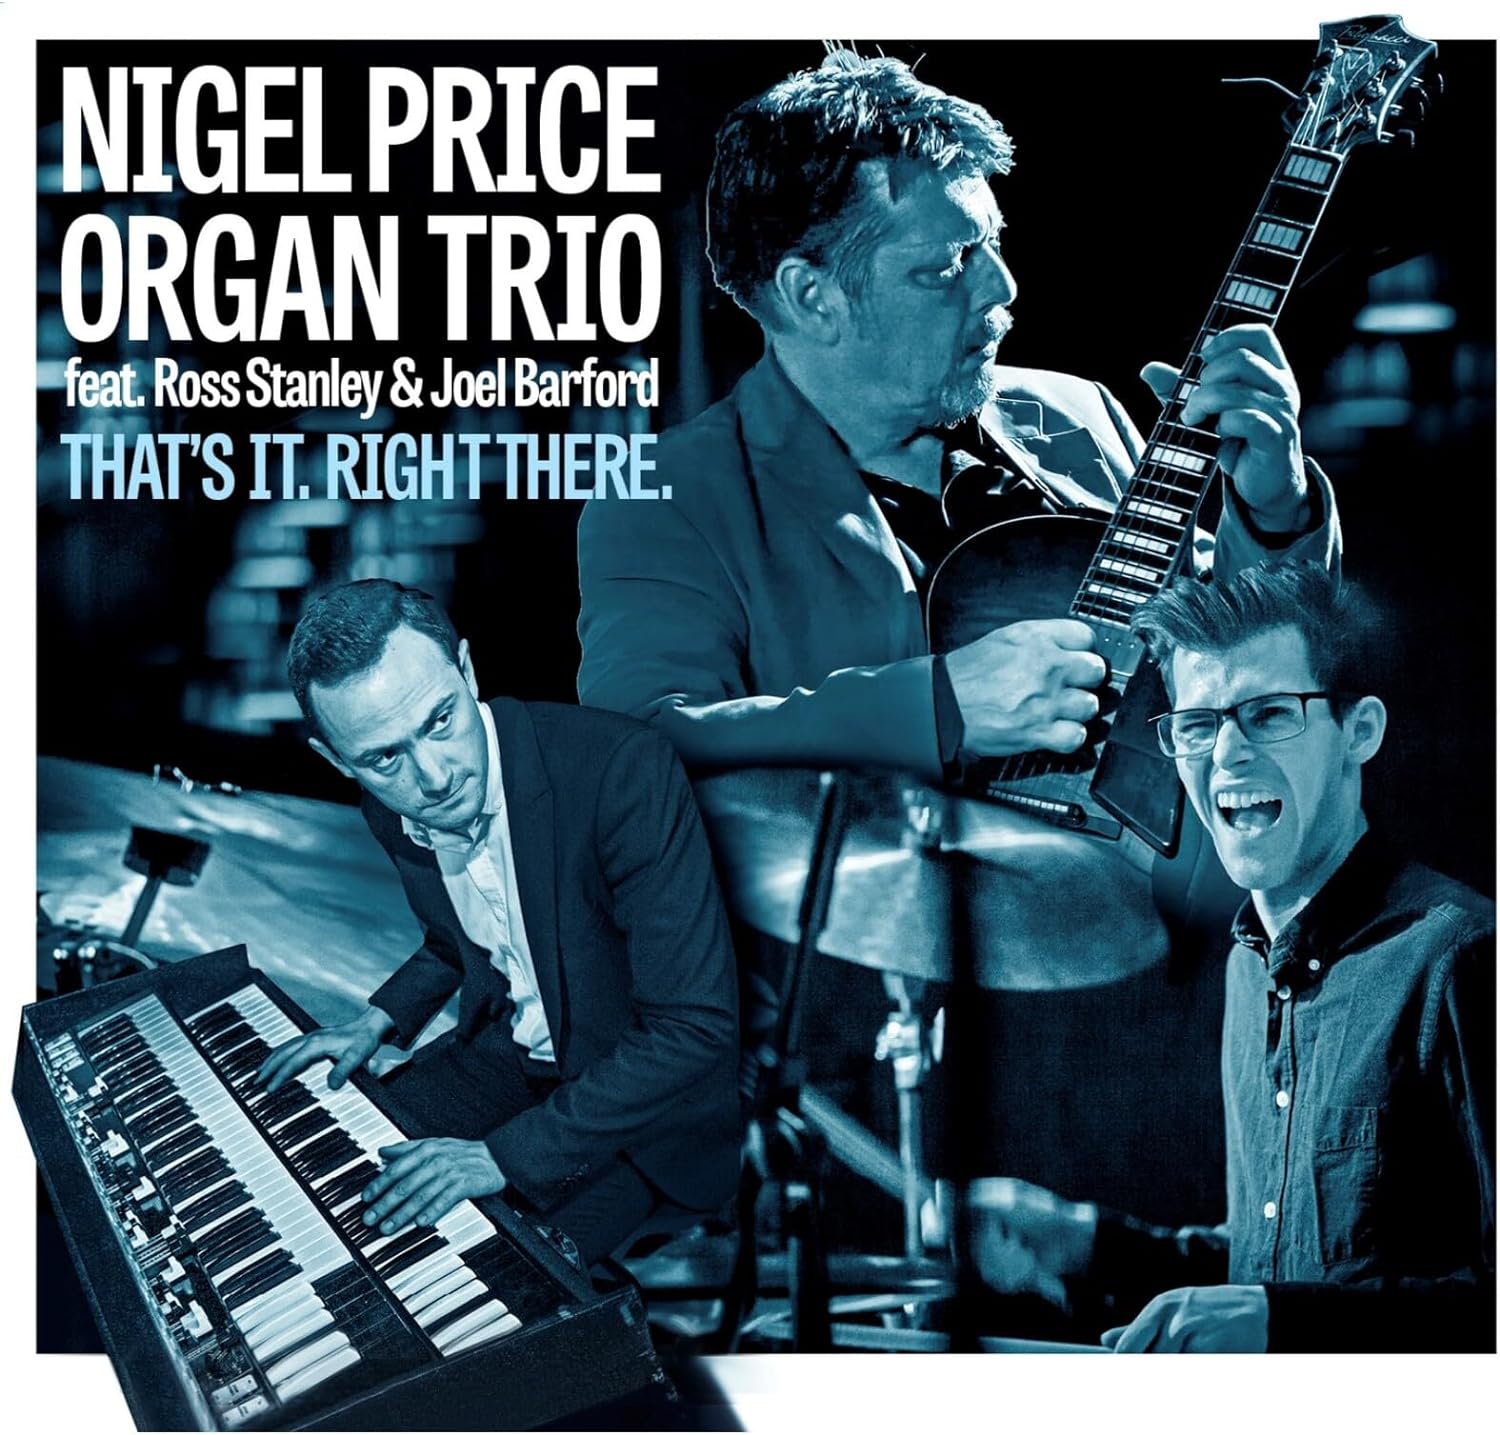 NIGEL PRICE - Nigel Price Organ Trio : That's it. Right There. cover 